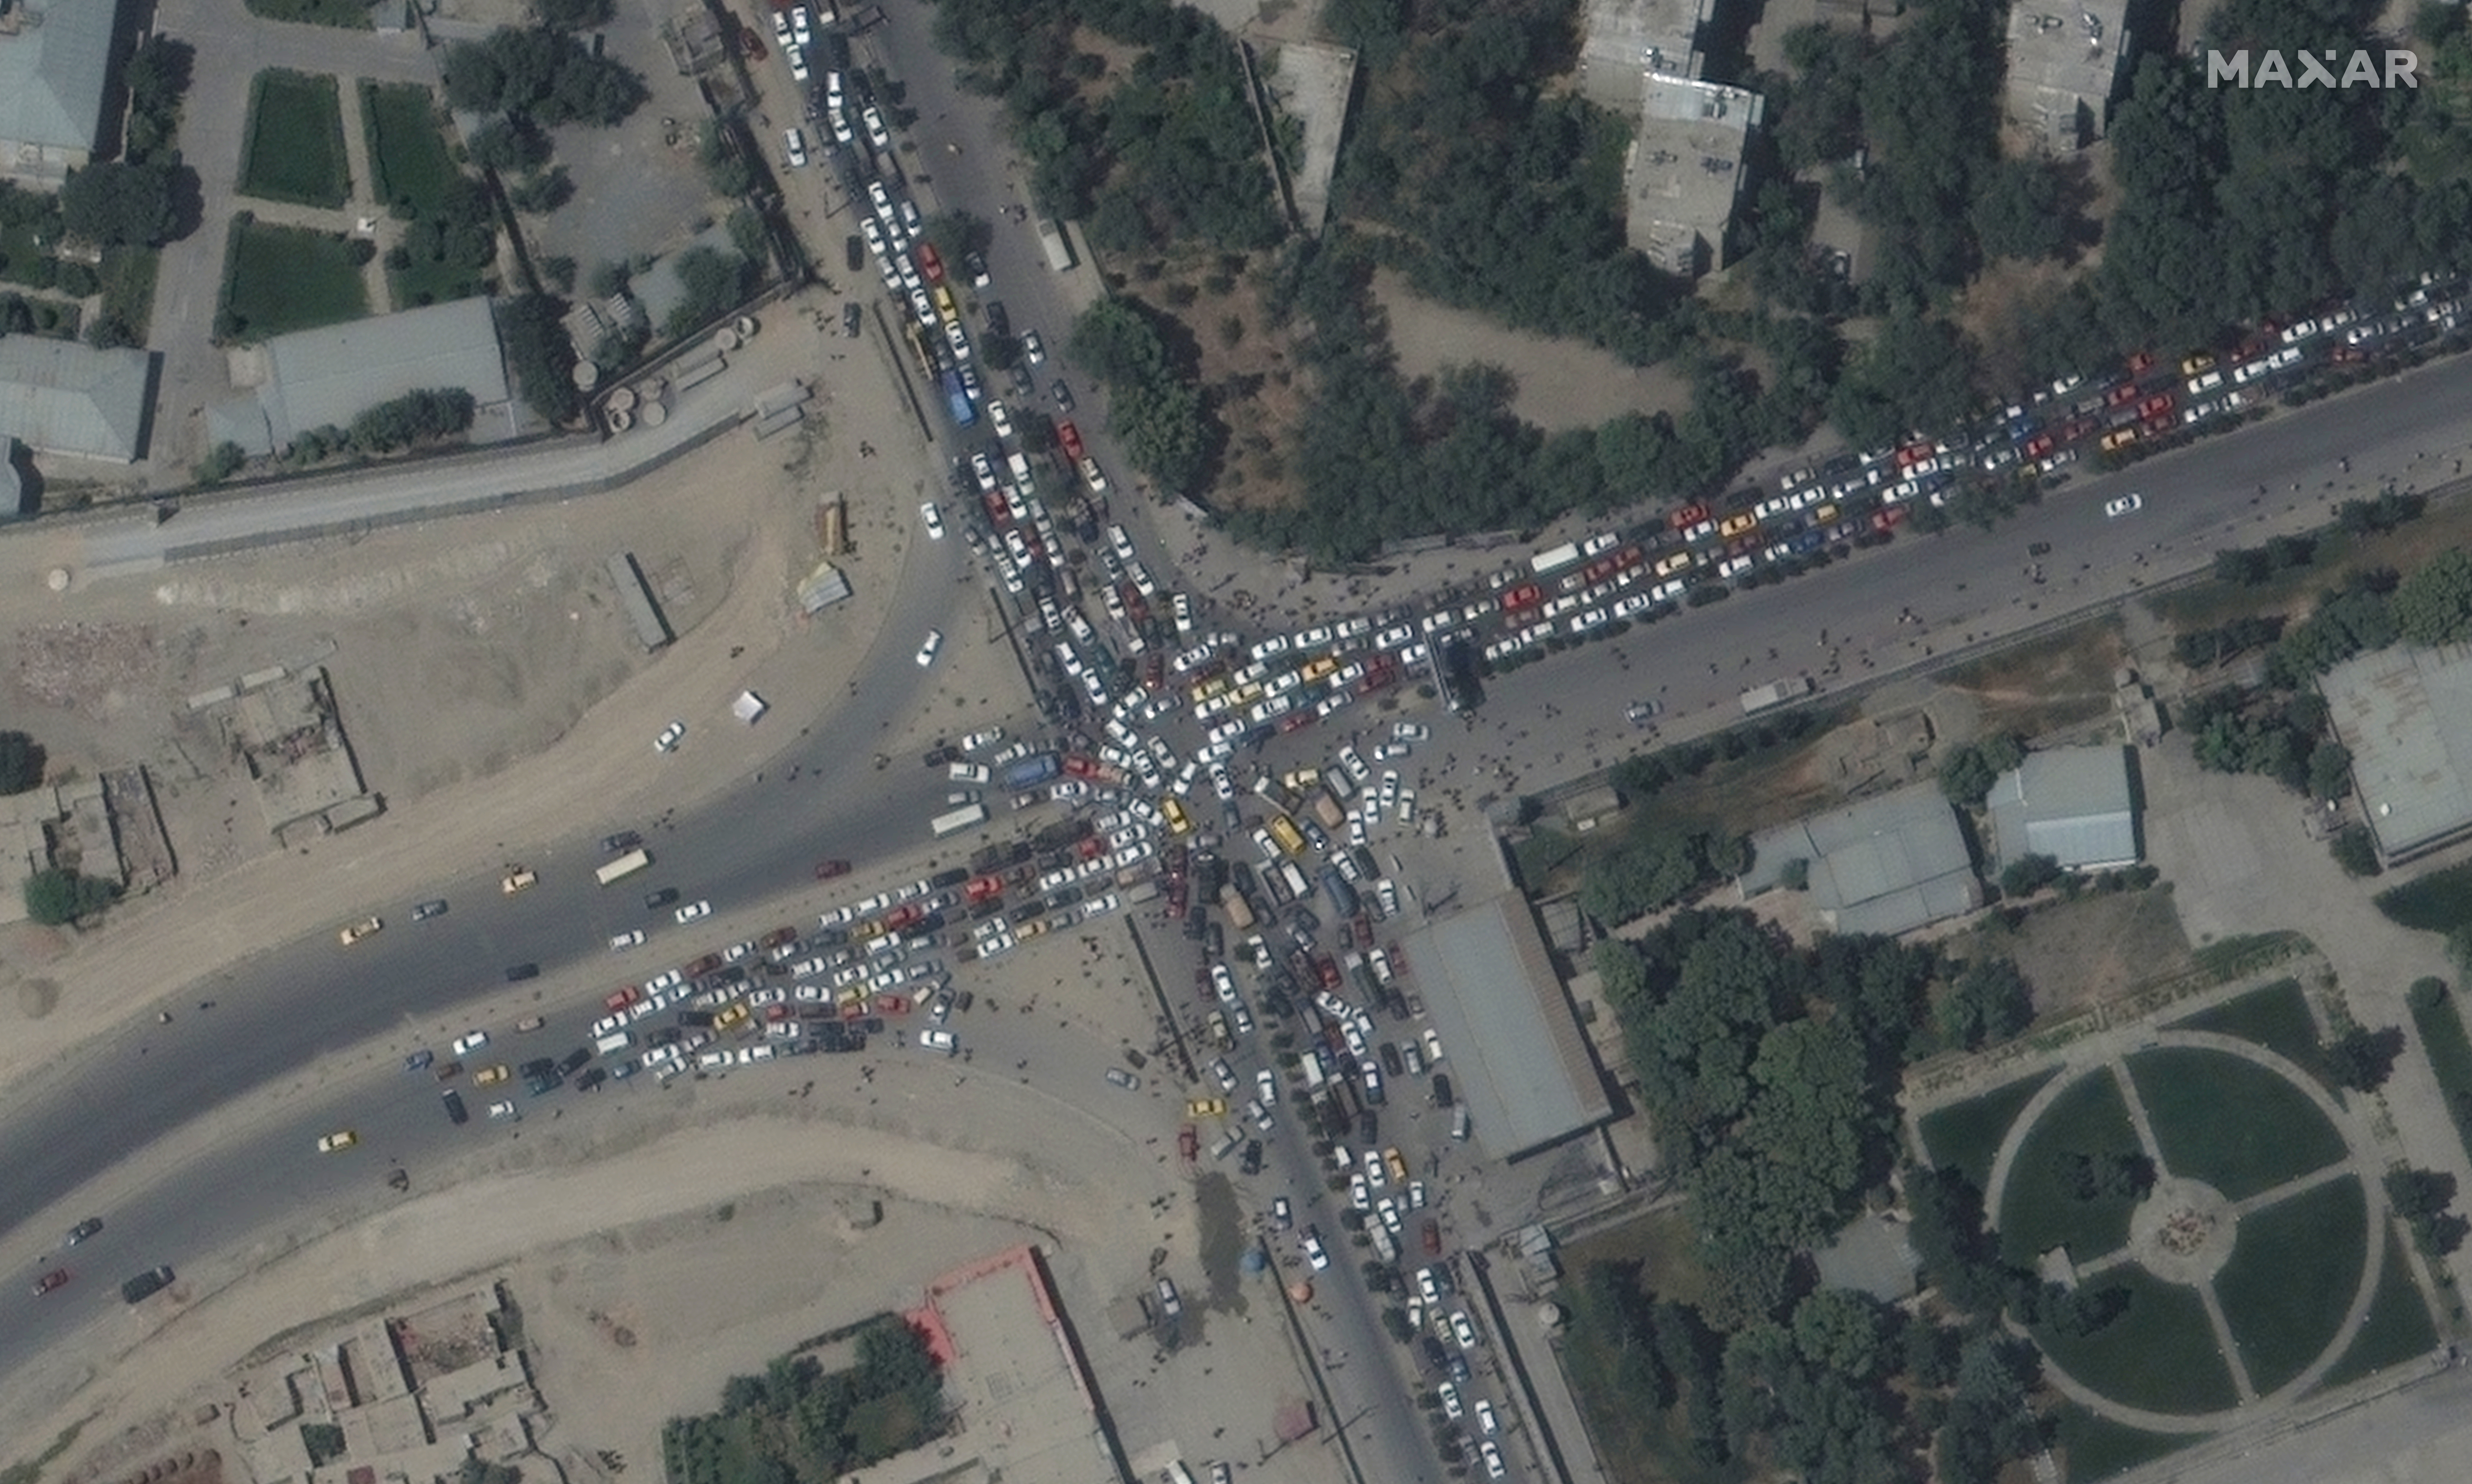 Traffic jam and crowds are seen near Kabul's airport in Afghanistan August 16, 2021. SATELLITE IMAGE 2021 MAXAR TECHNOLOGIES/Handout via REUTERS